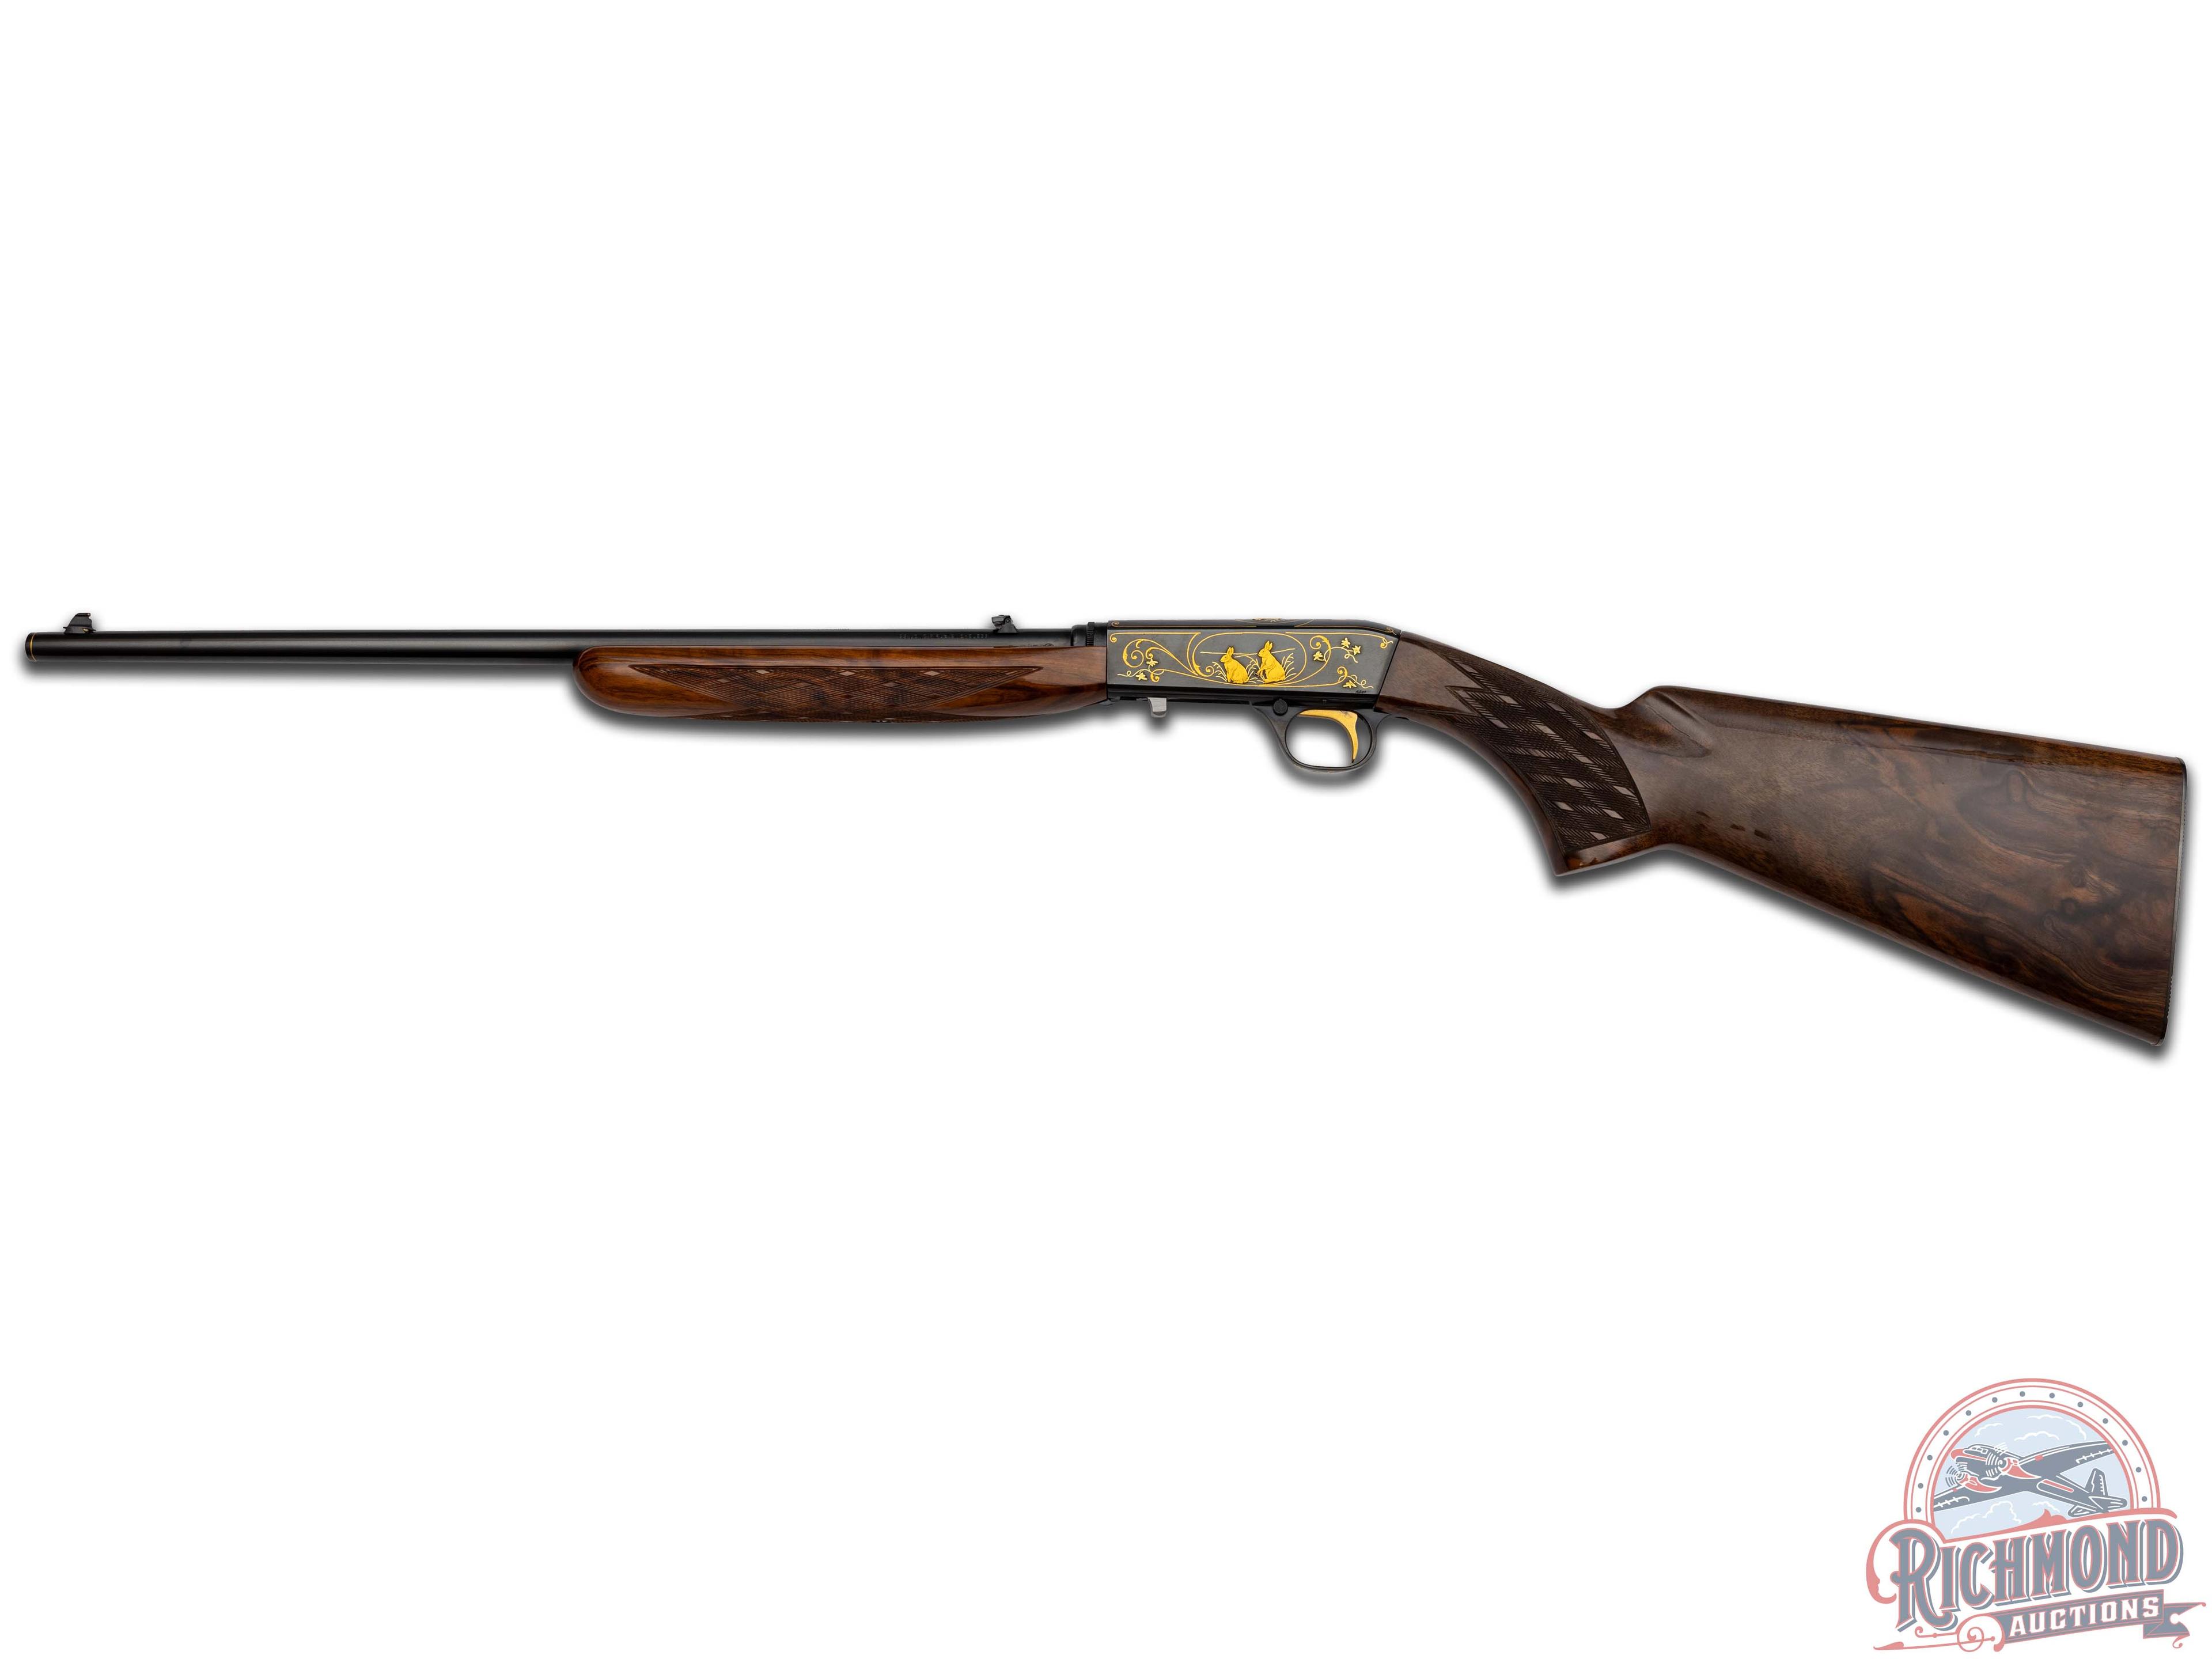 Double Signed Custom Pre-1955 Belgian Browning SA-22 Semi-Automatic Rifle by Angelo Bee